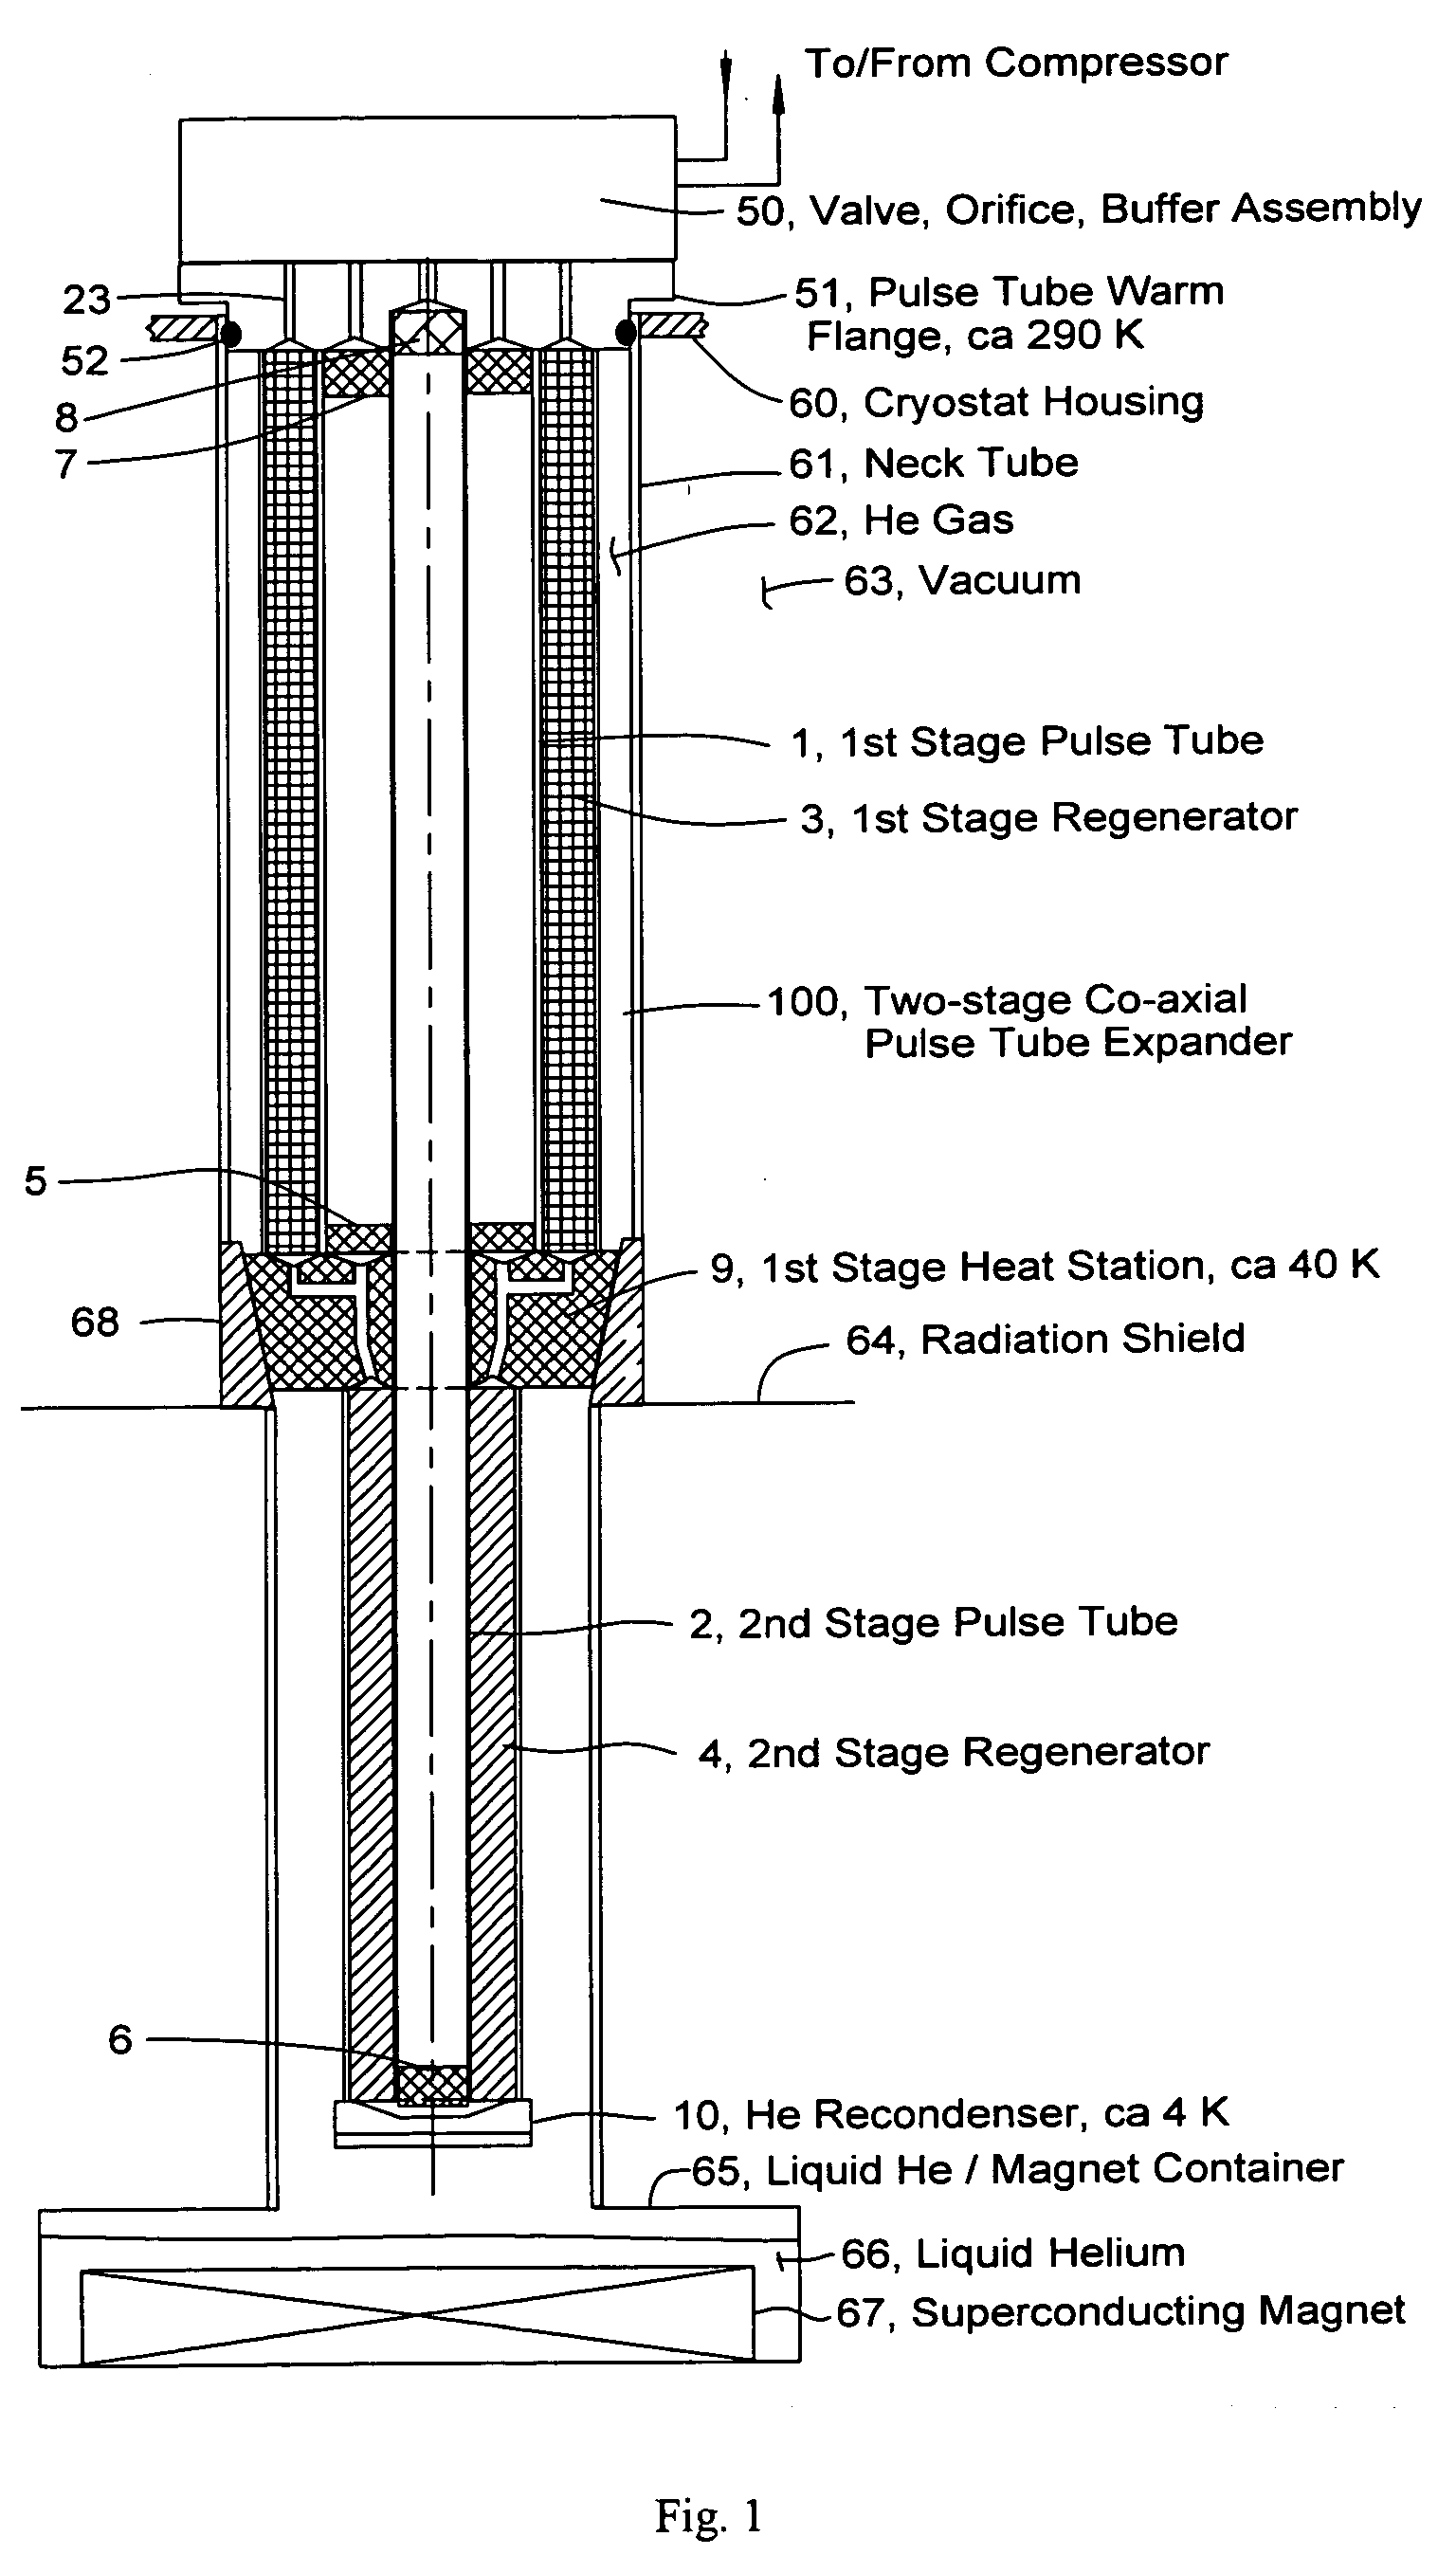 Co-axial multi-stage pulse tube for helium recondensation